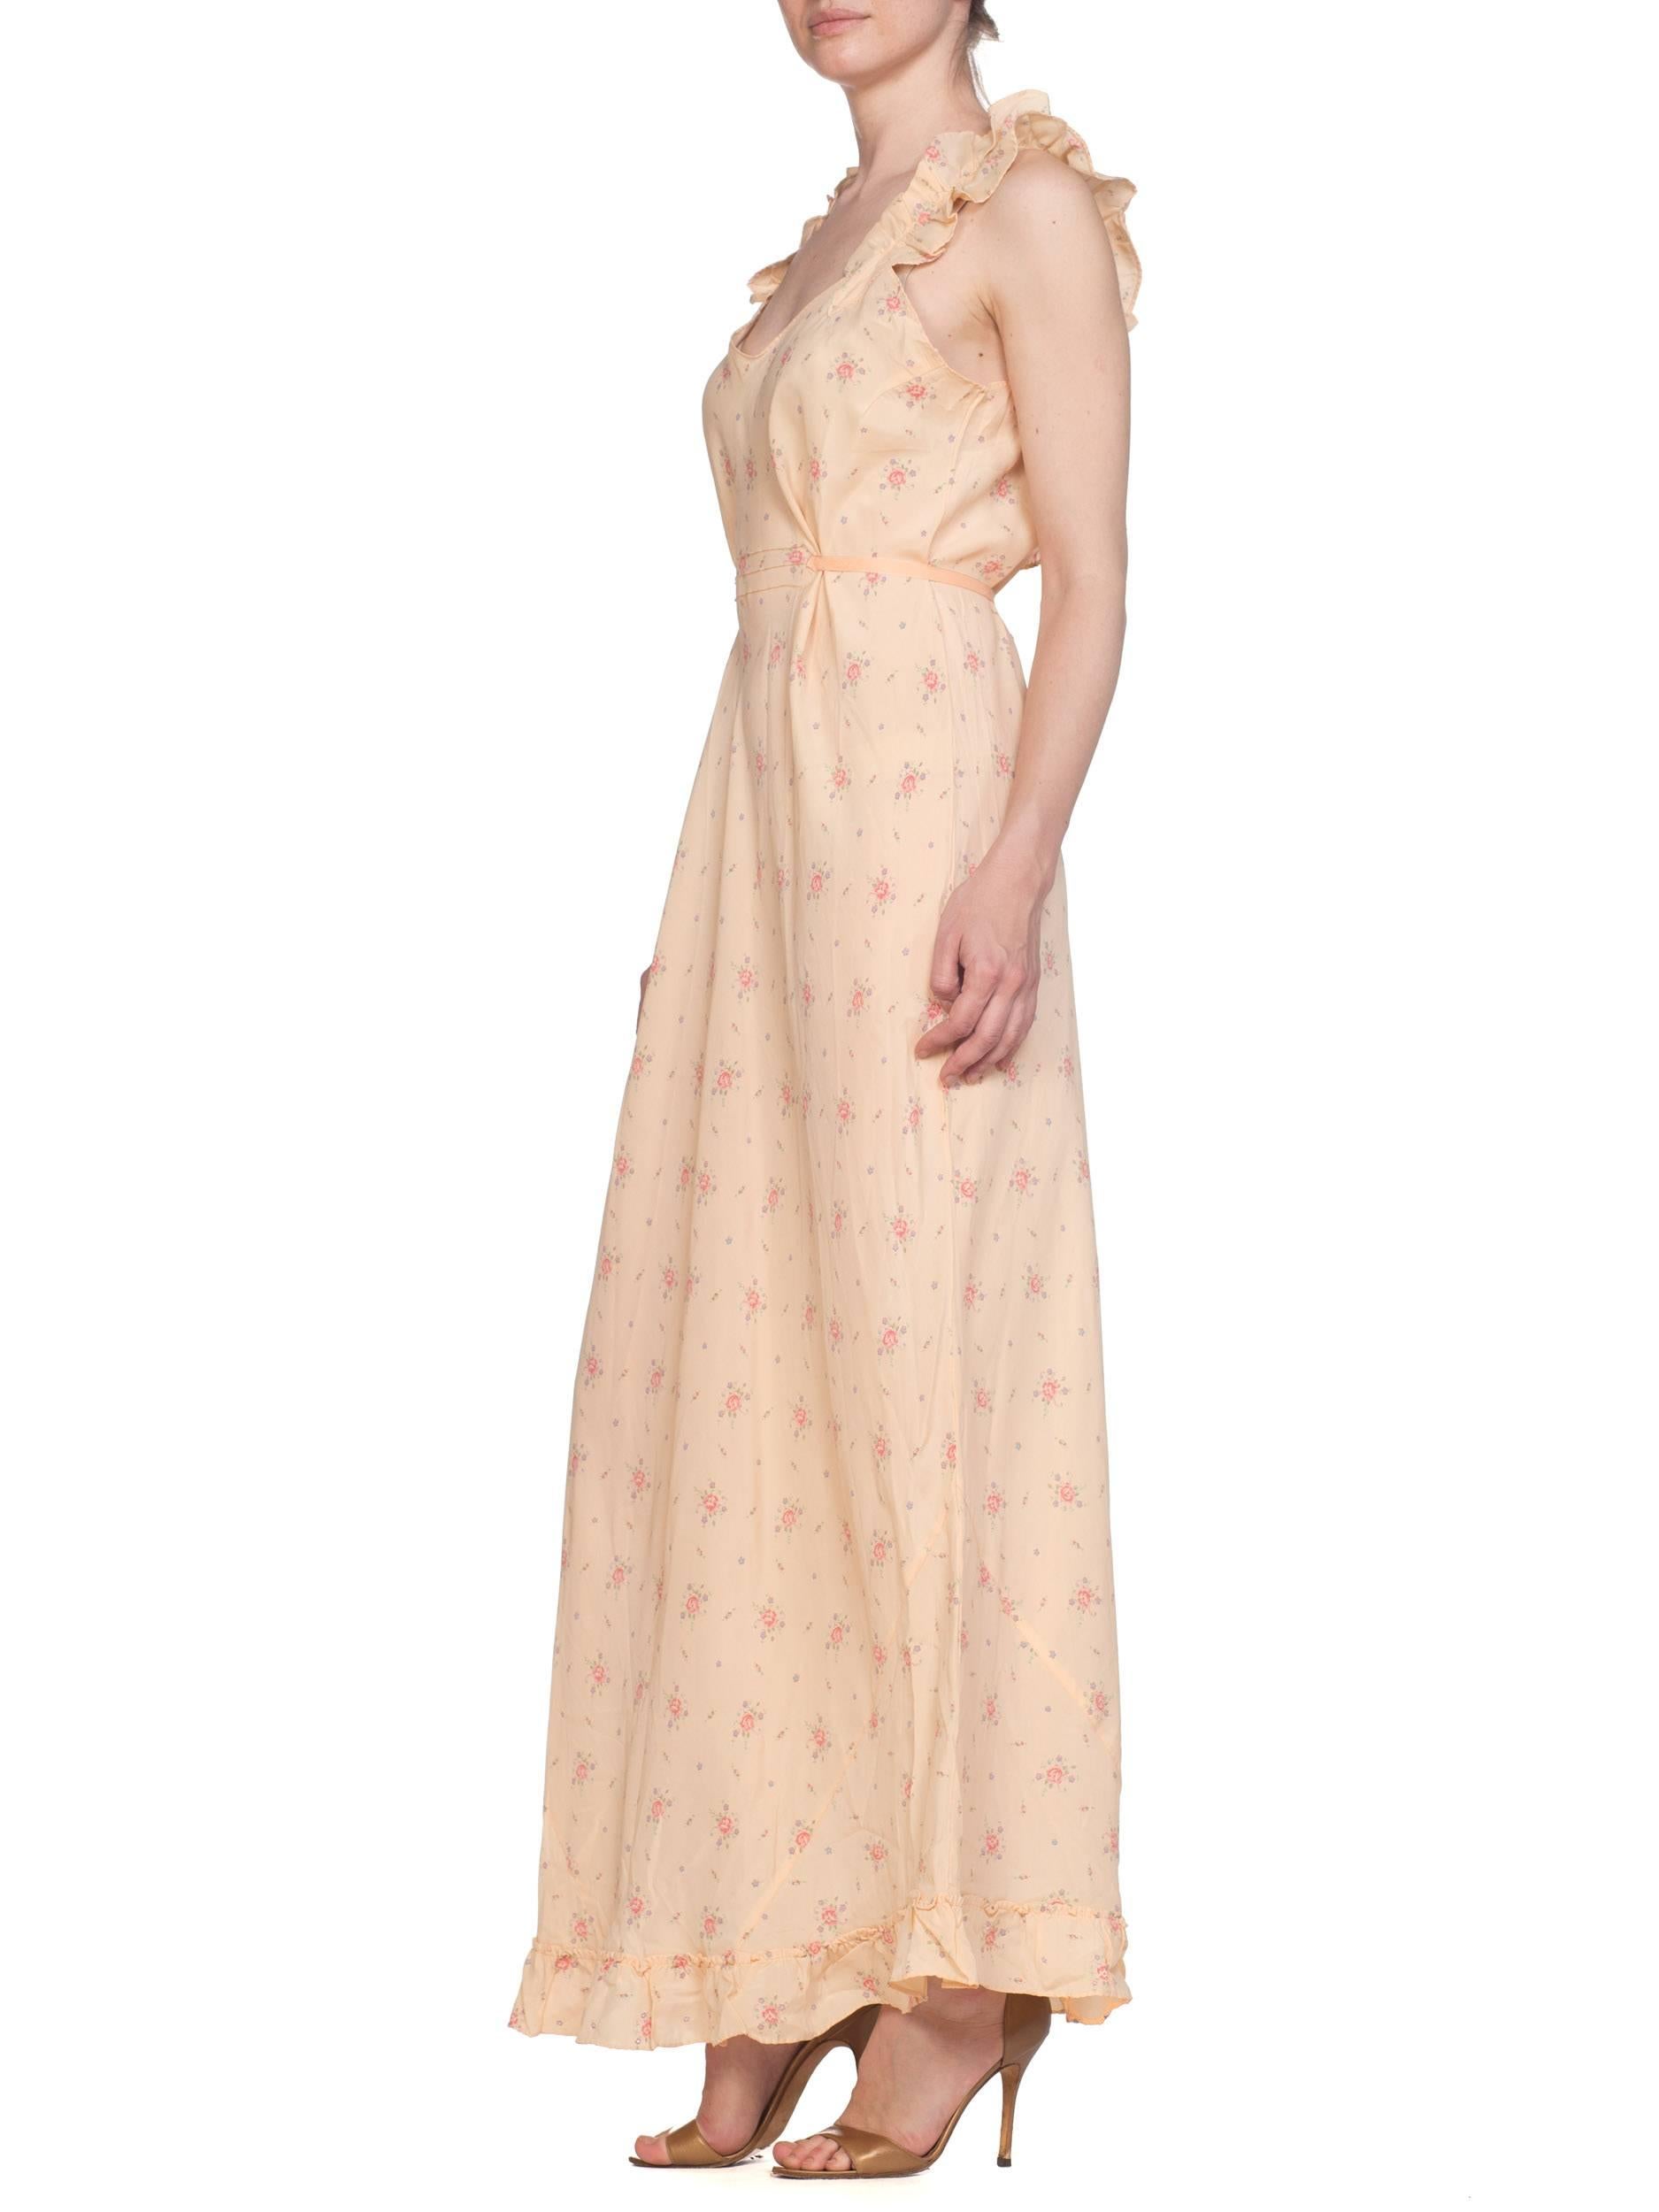 1940S Peach Bias Cut Silk Floral  Negligee With Low Ruffle Back & Waist Ties 3